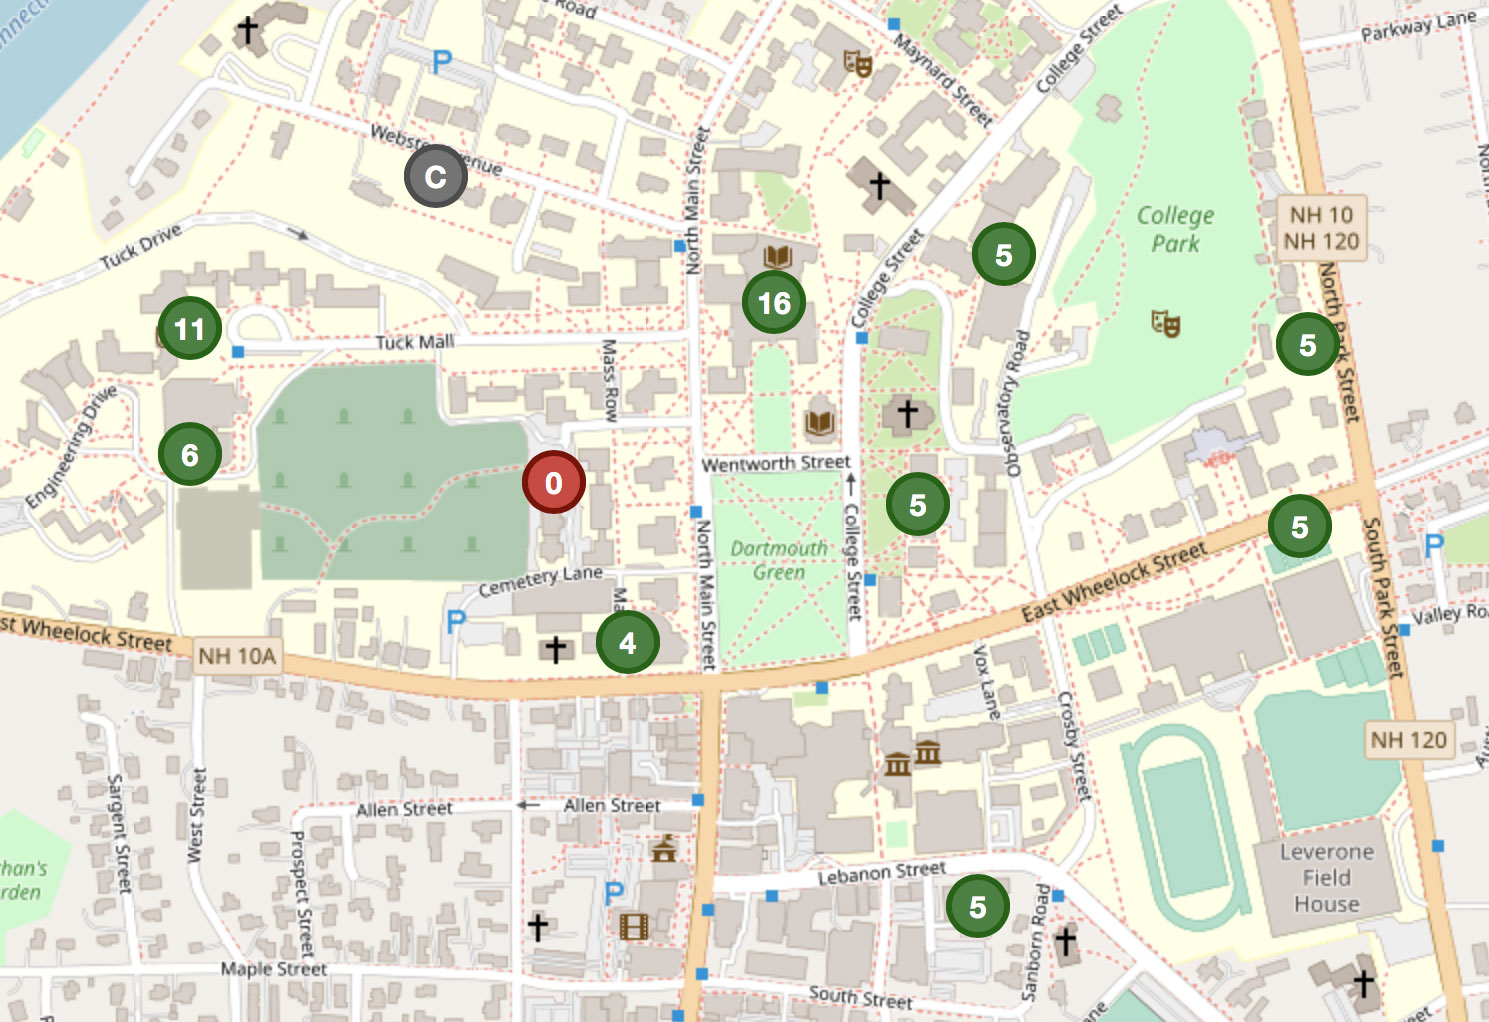 Campus Lab Mapping Software